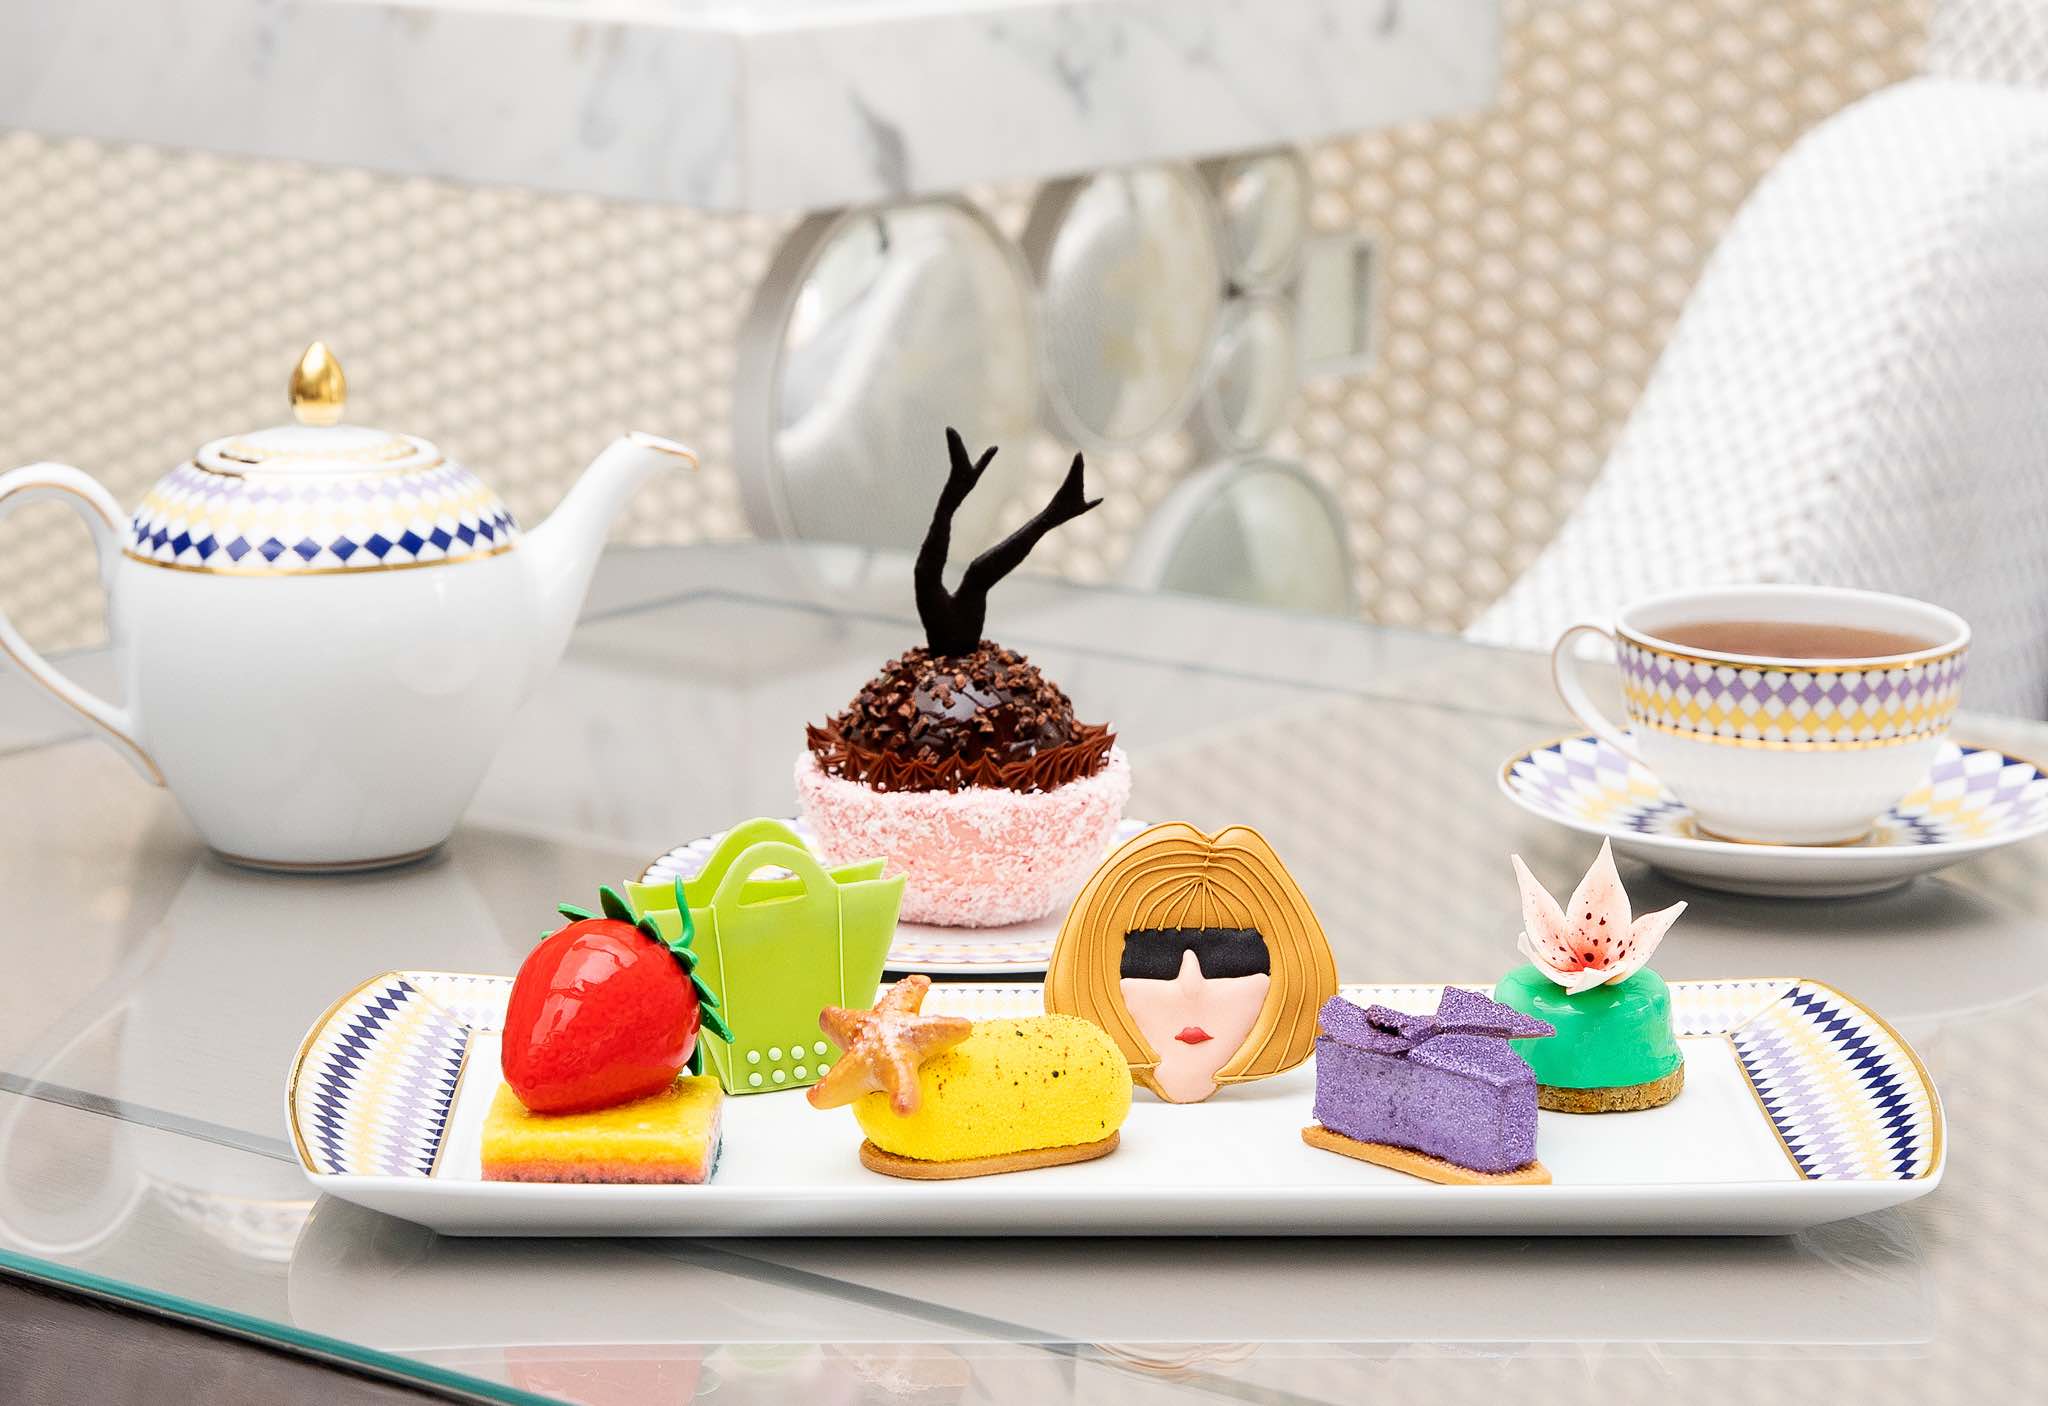 You are currently viewing Prêt-à-Portea Afternoon Tea Returns to The Berkeley London